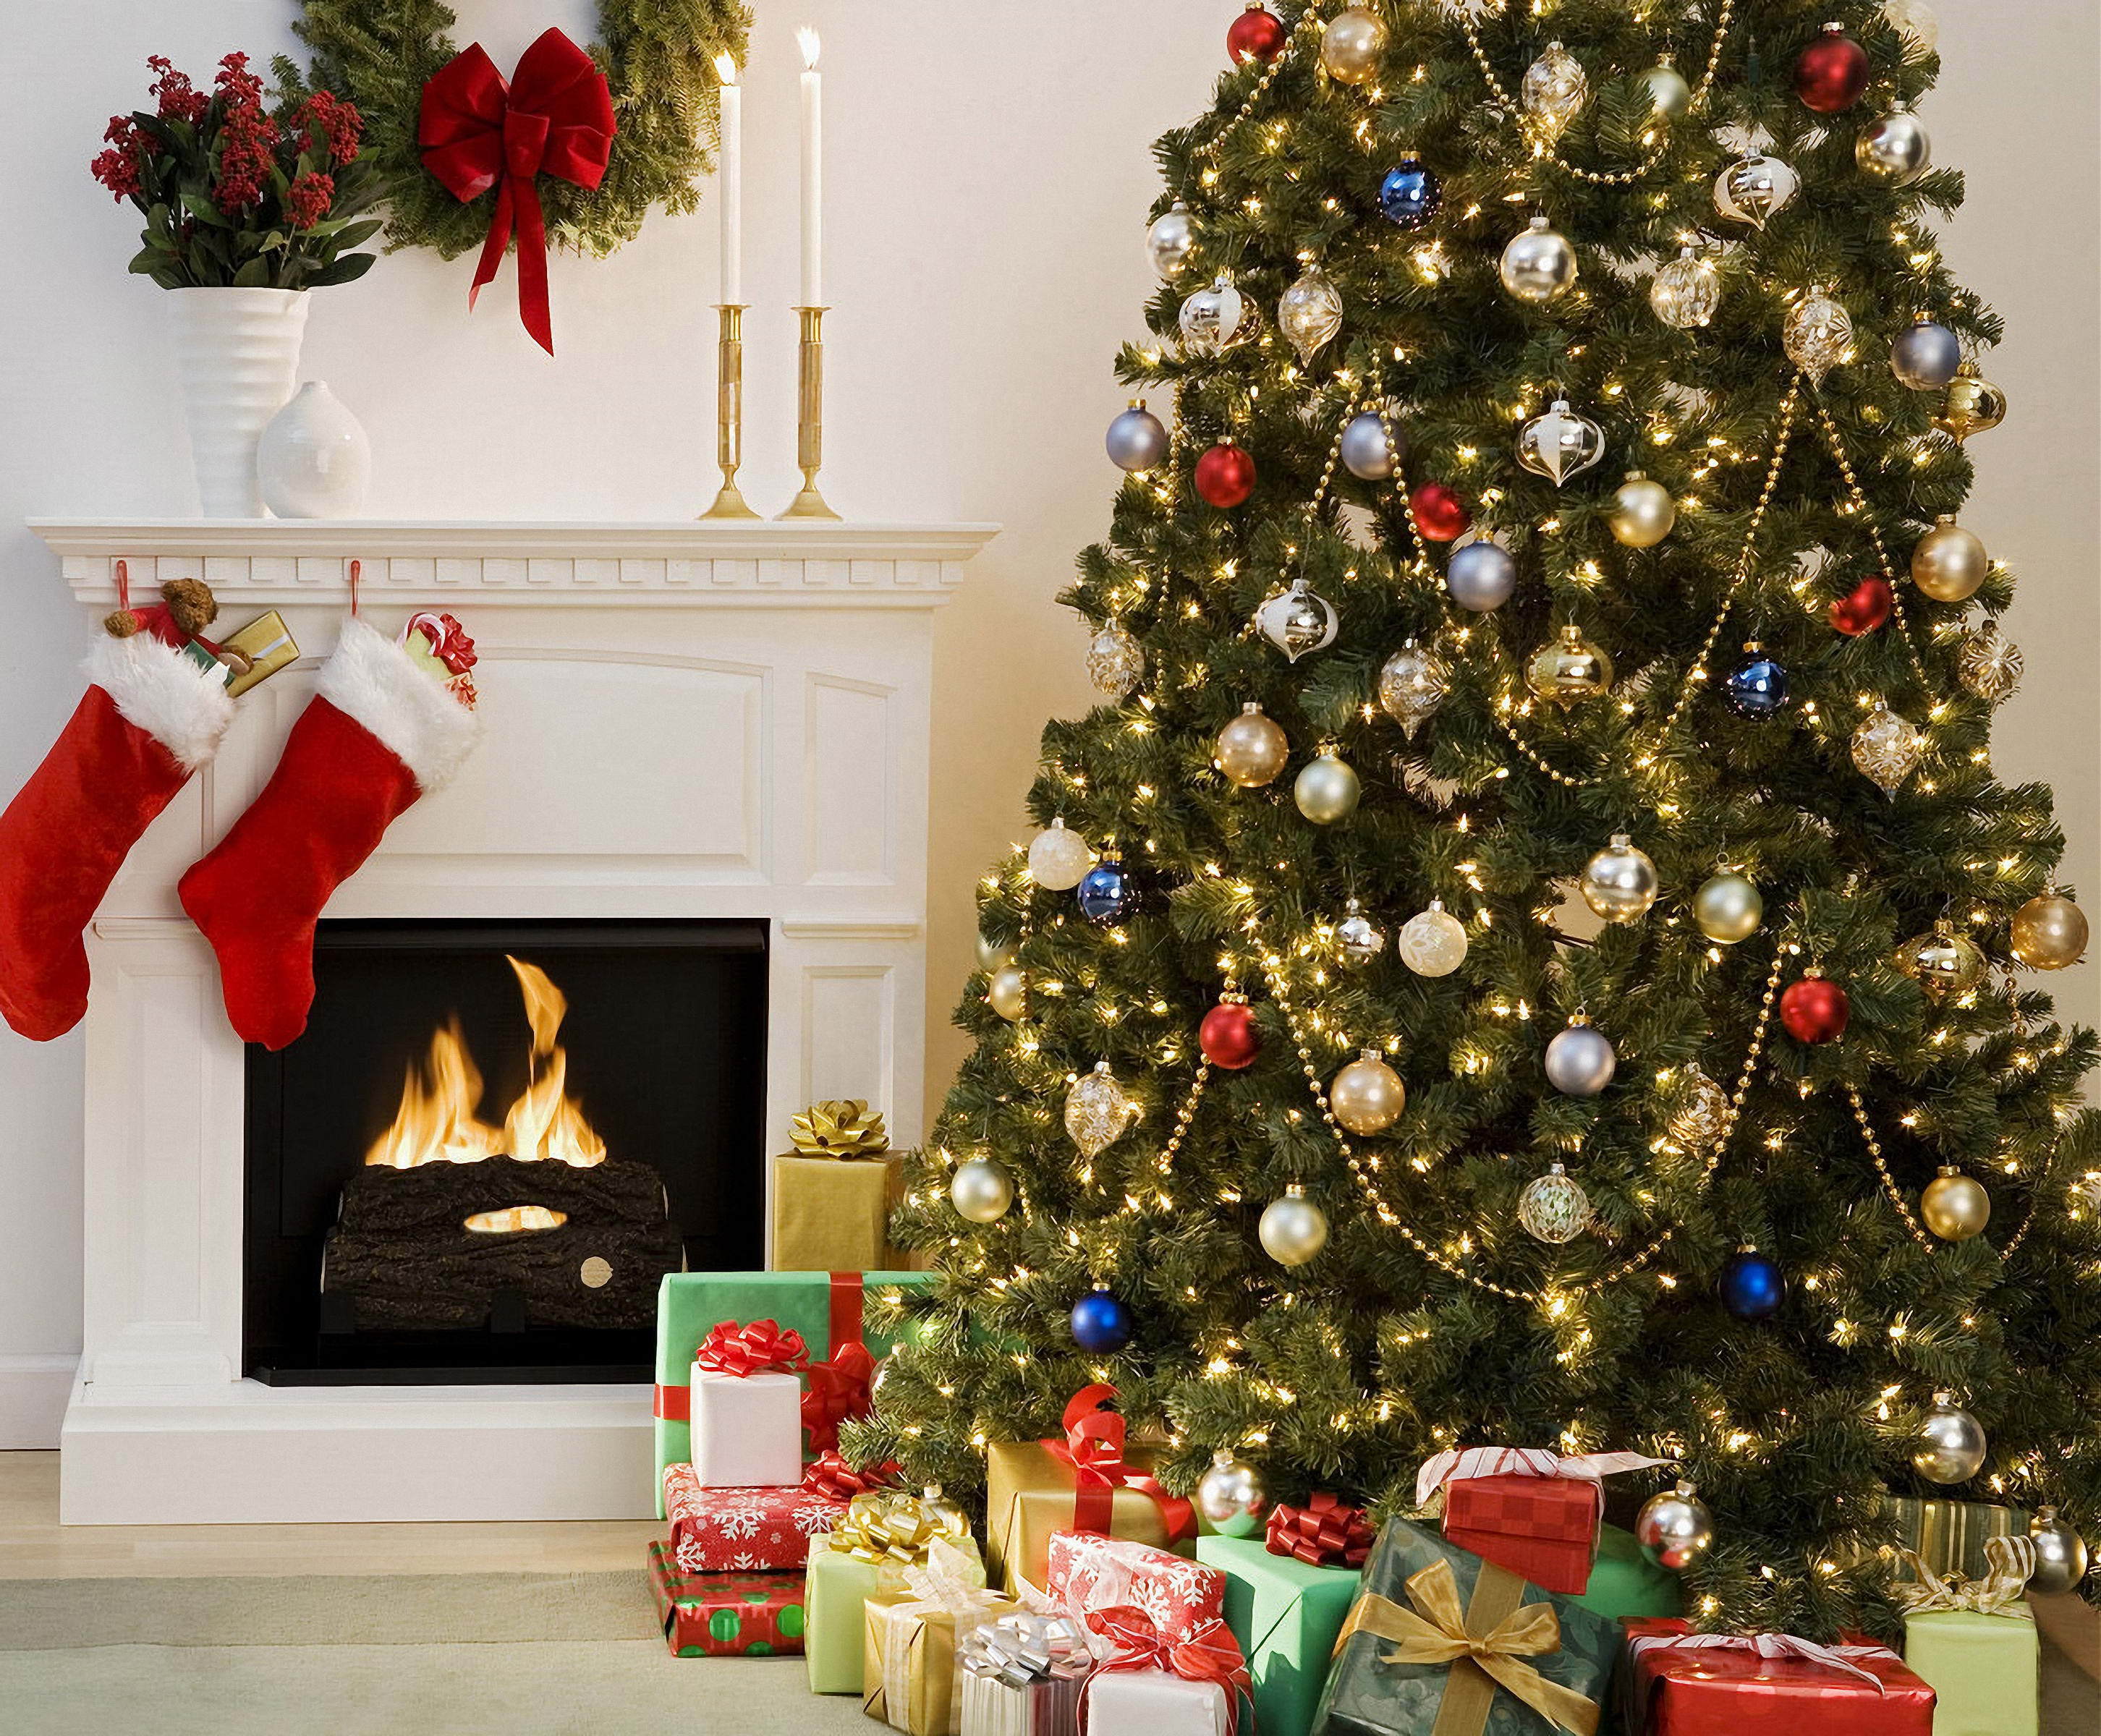 Christmas tree with presents by the fireplace wallpaper and image, picture, photo